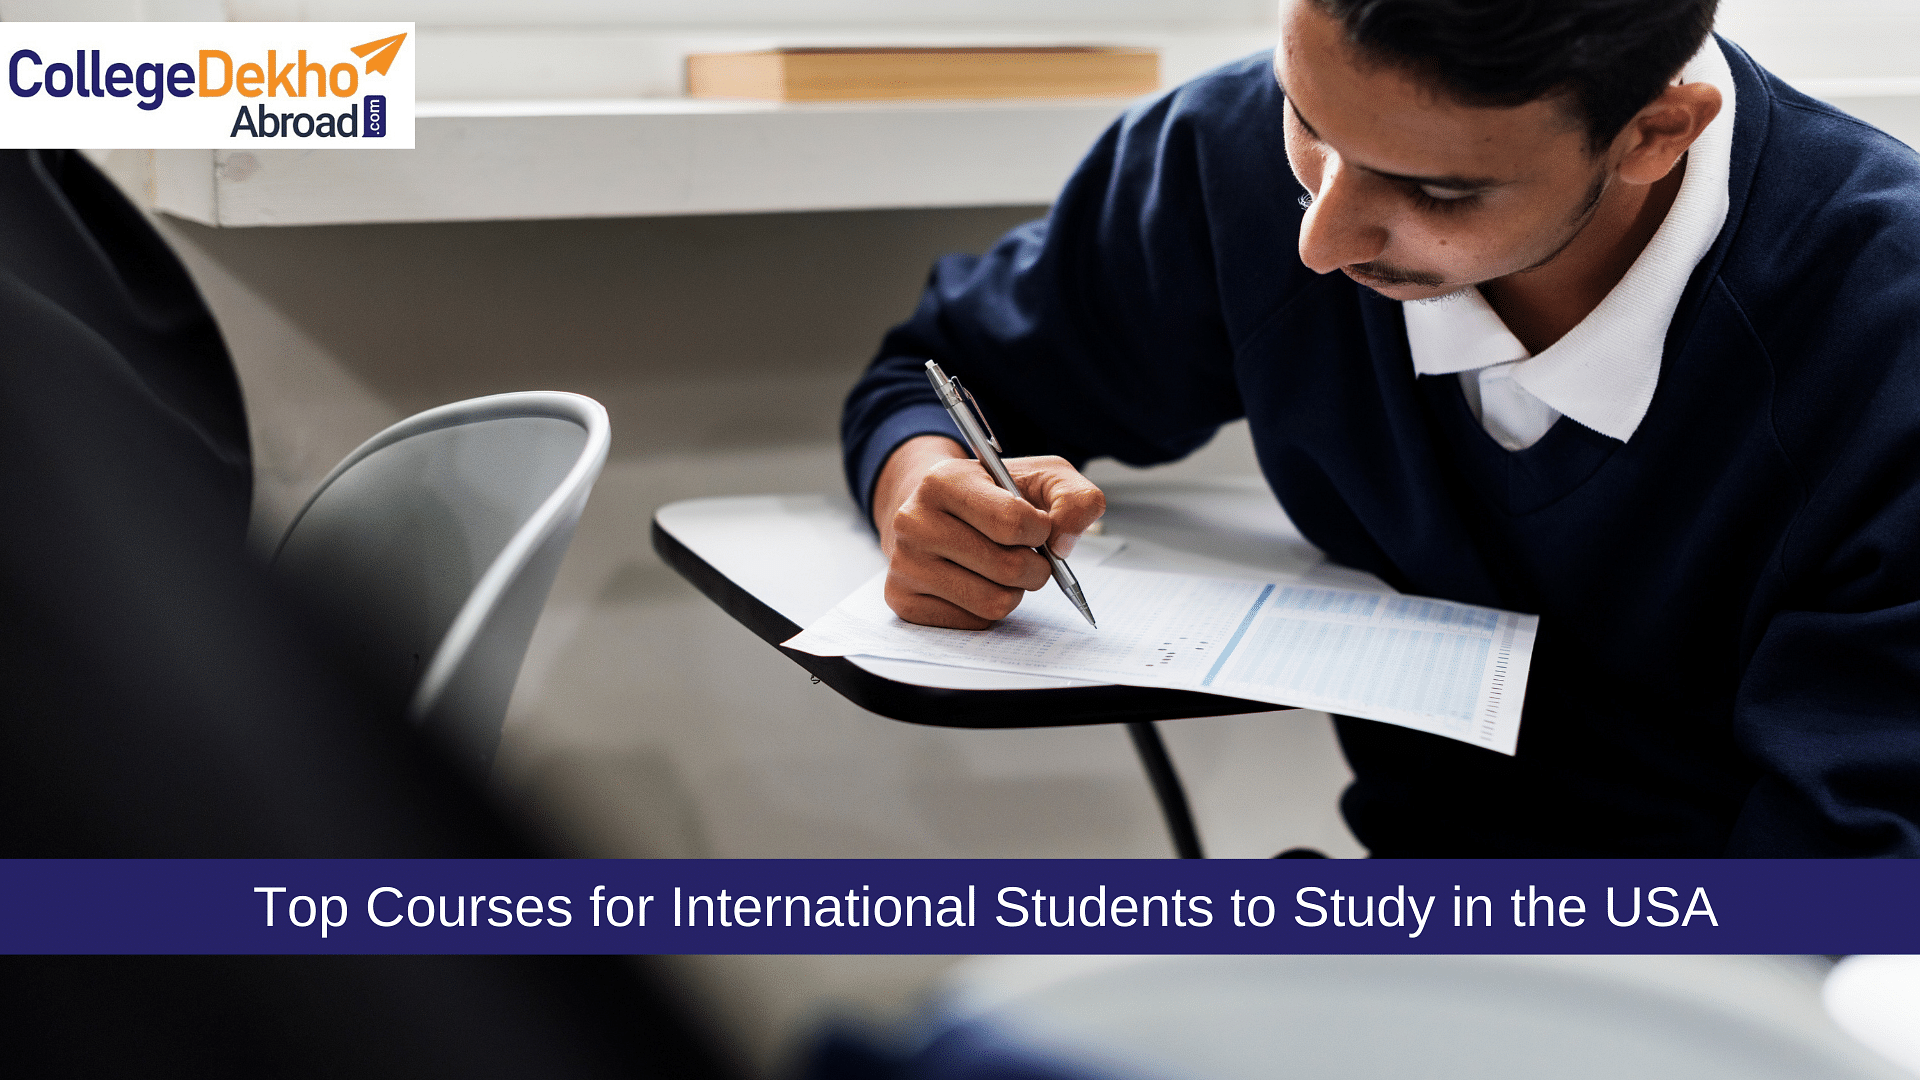 Top Courses for International Students to Study in the USA